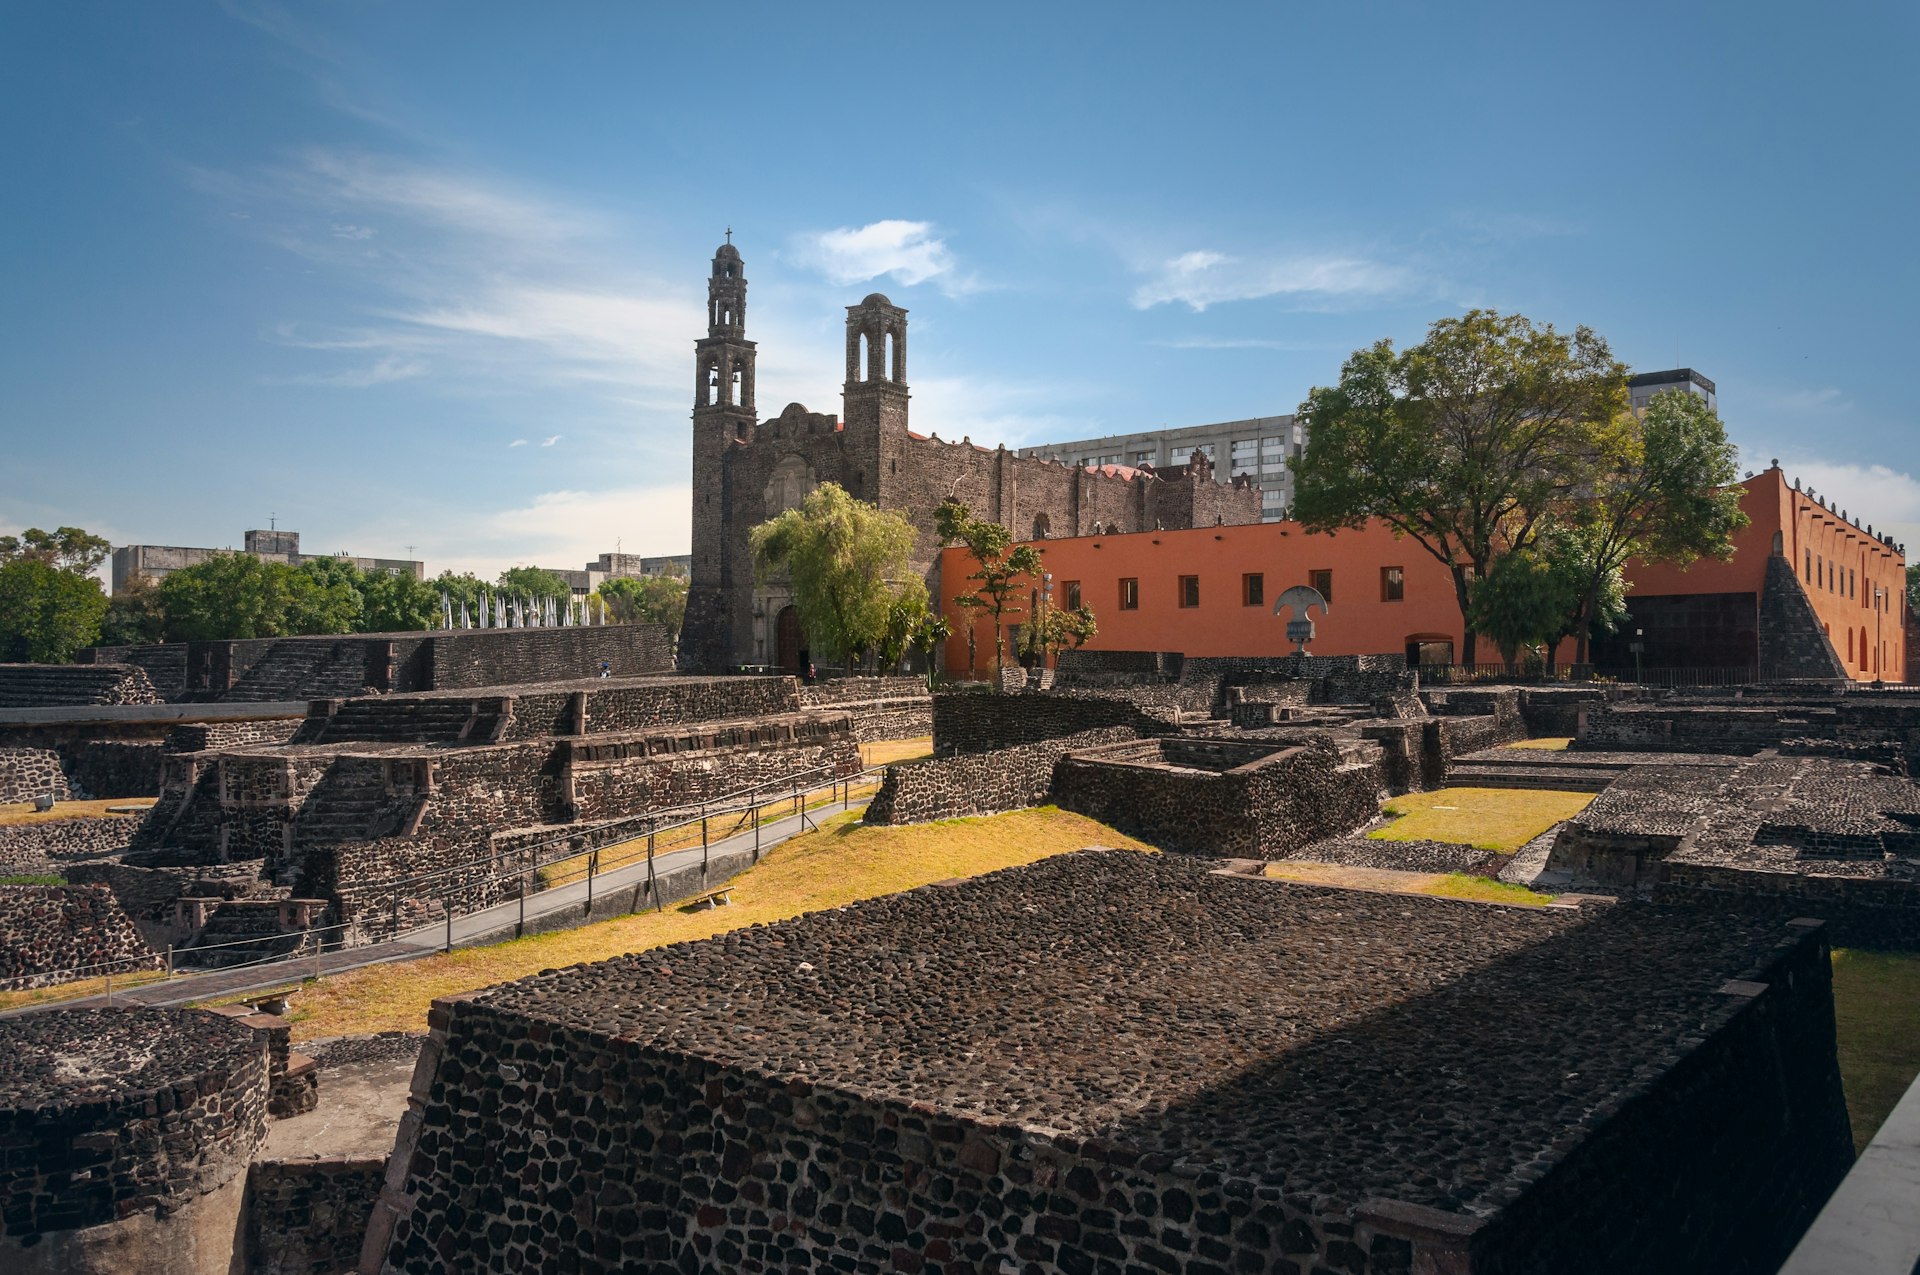 This public square featuring the remains of an Aztec city was the site of the 1968 Tlatelolco Massacre, Plaza de las Tres Culturas, Tlatelolco, Mexico City, Mexico